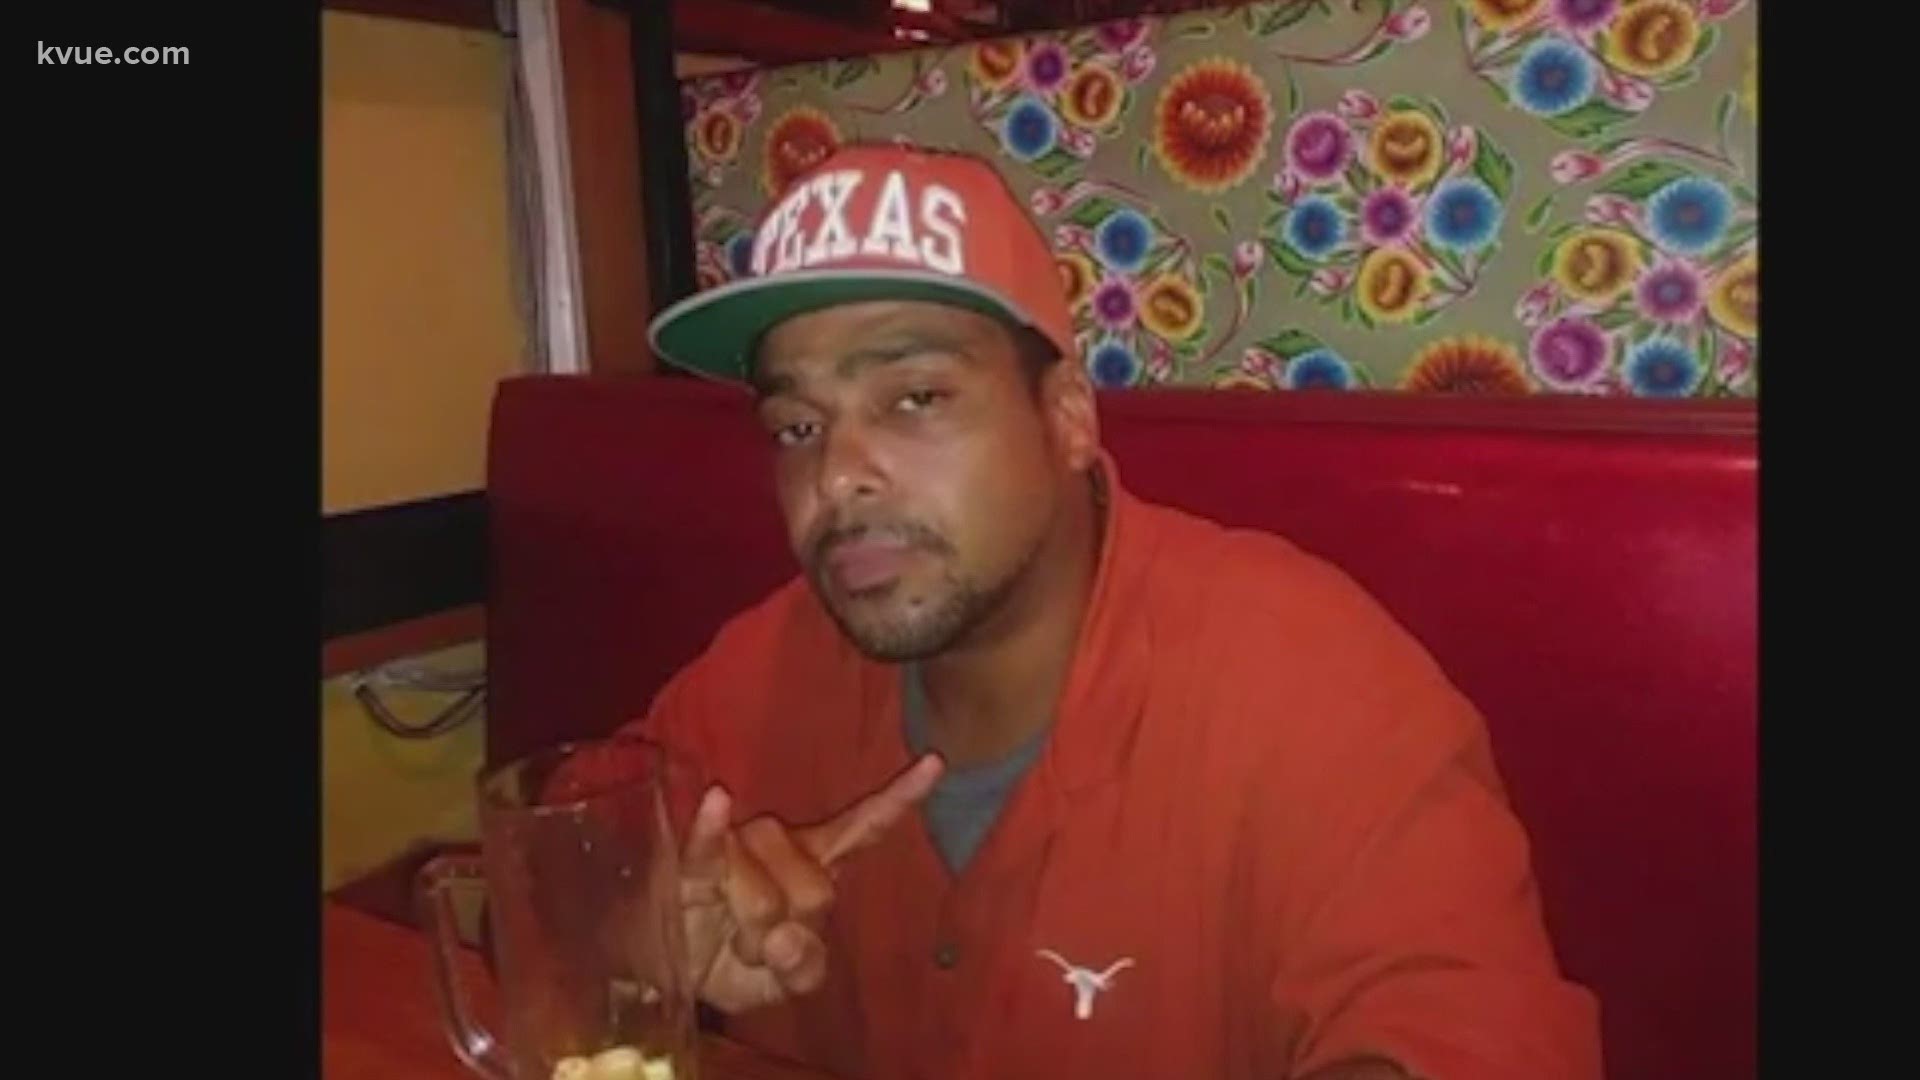 This week's episode of the "Still No Justice" podcast tells the story of Michael Ramos, a man shot and killed by police in southeast Austin in April 2020.